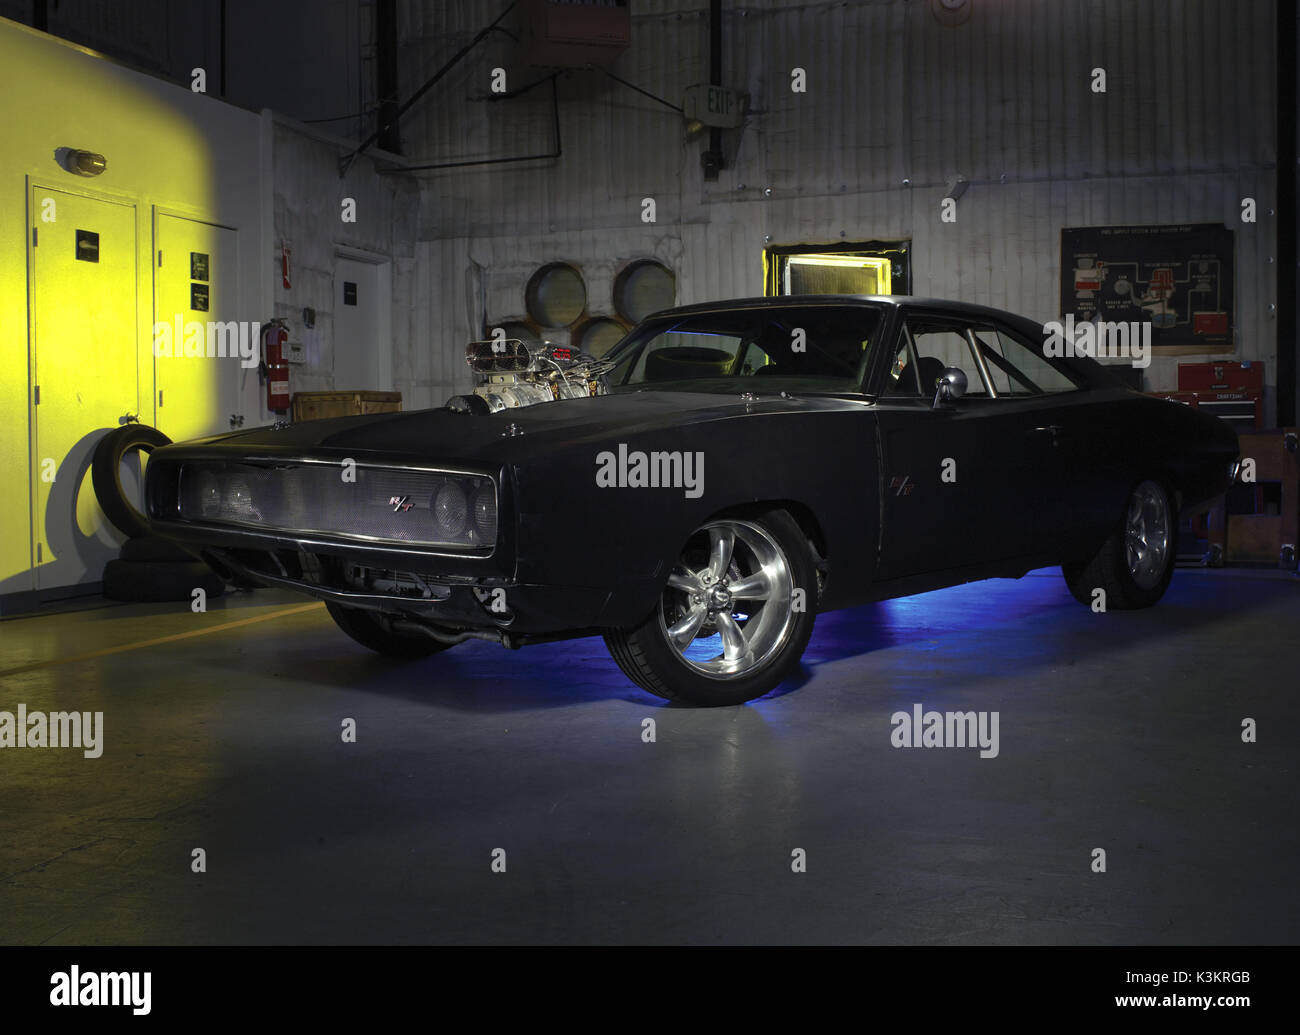 FAST & FURIOUS [US 2009] aka FAST & FURIOUS 4 Dom Toretto's 1970 Dodge  Charger Date: 2009 Stock Photo - Alamy